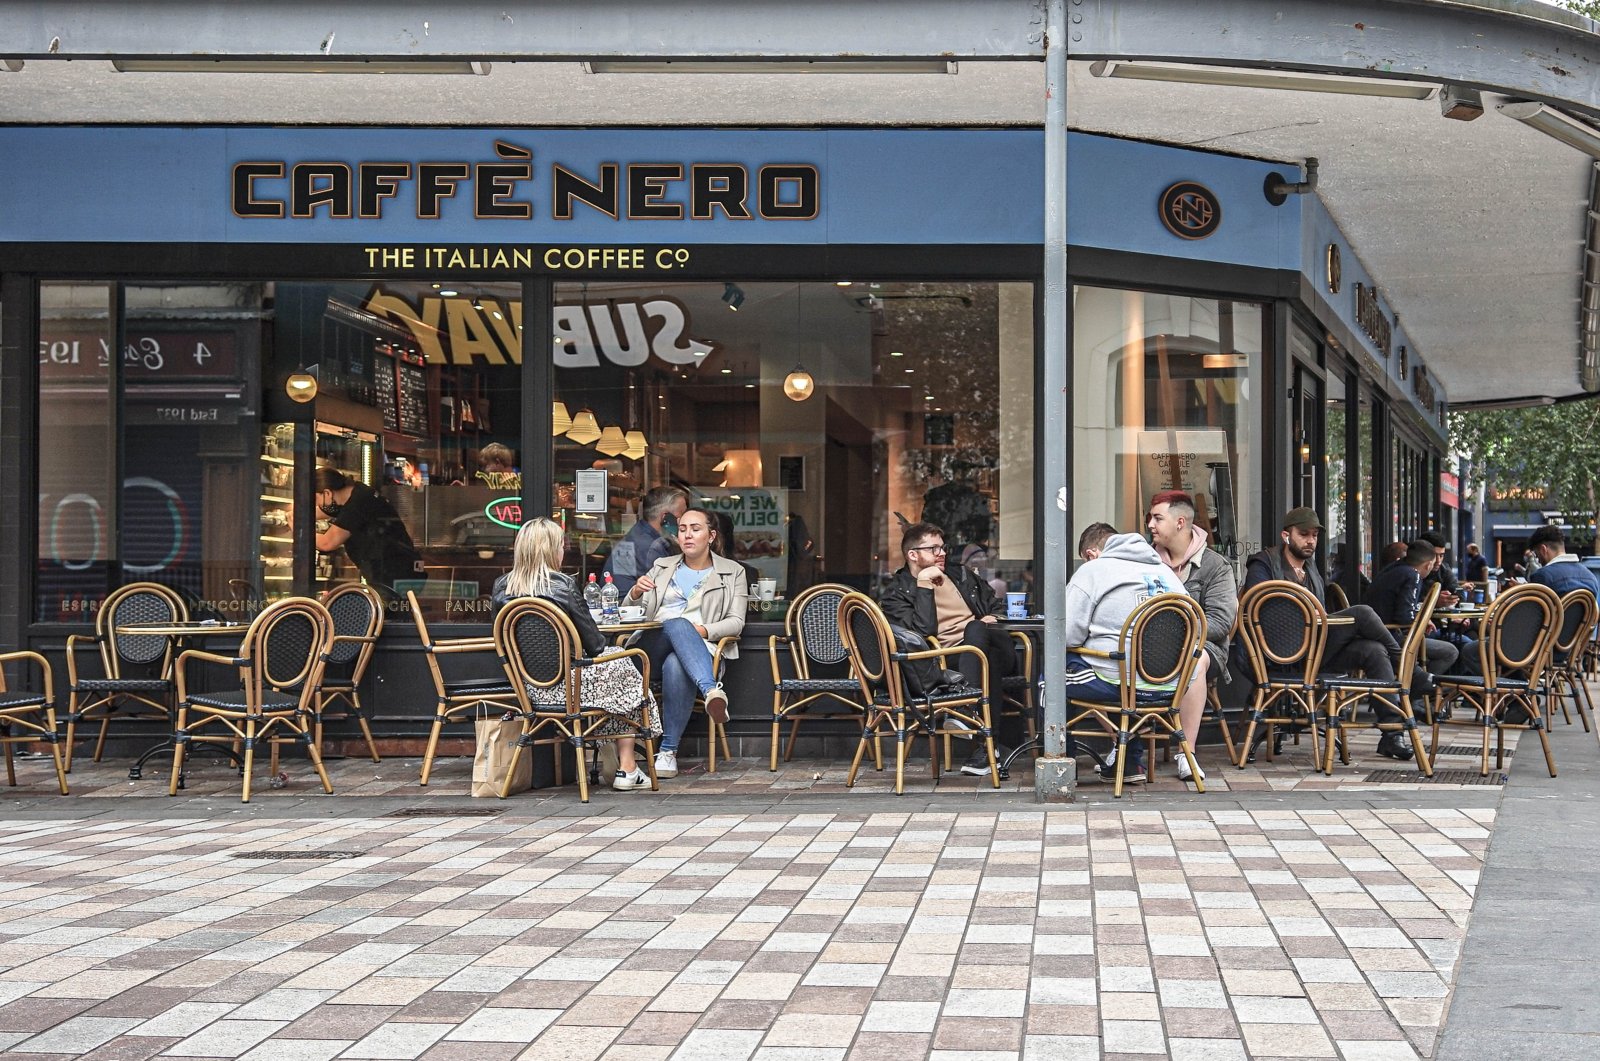 Customers relax outside a Caffe Nero coffee shop, in Fountain Street, Britain, Aug. 22, 2021. (Reuters Photo)